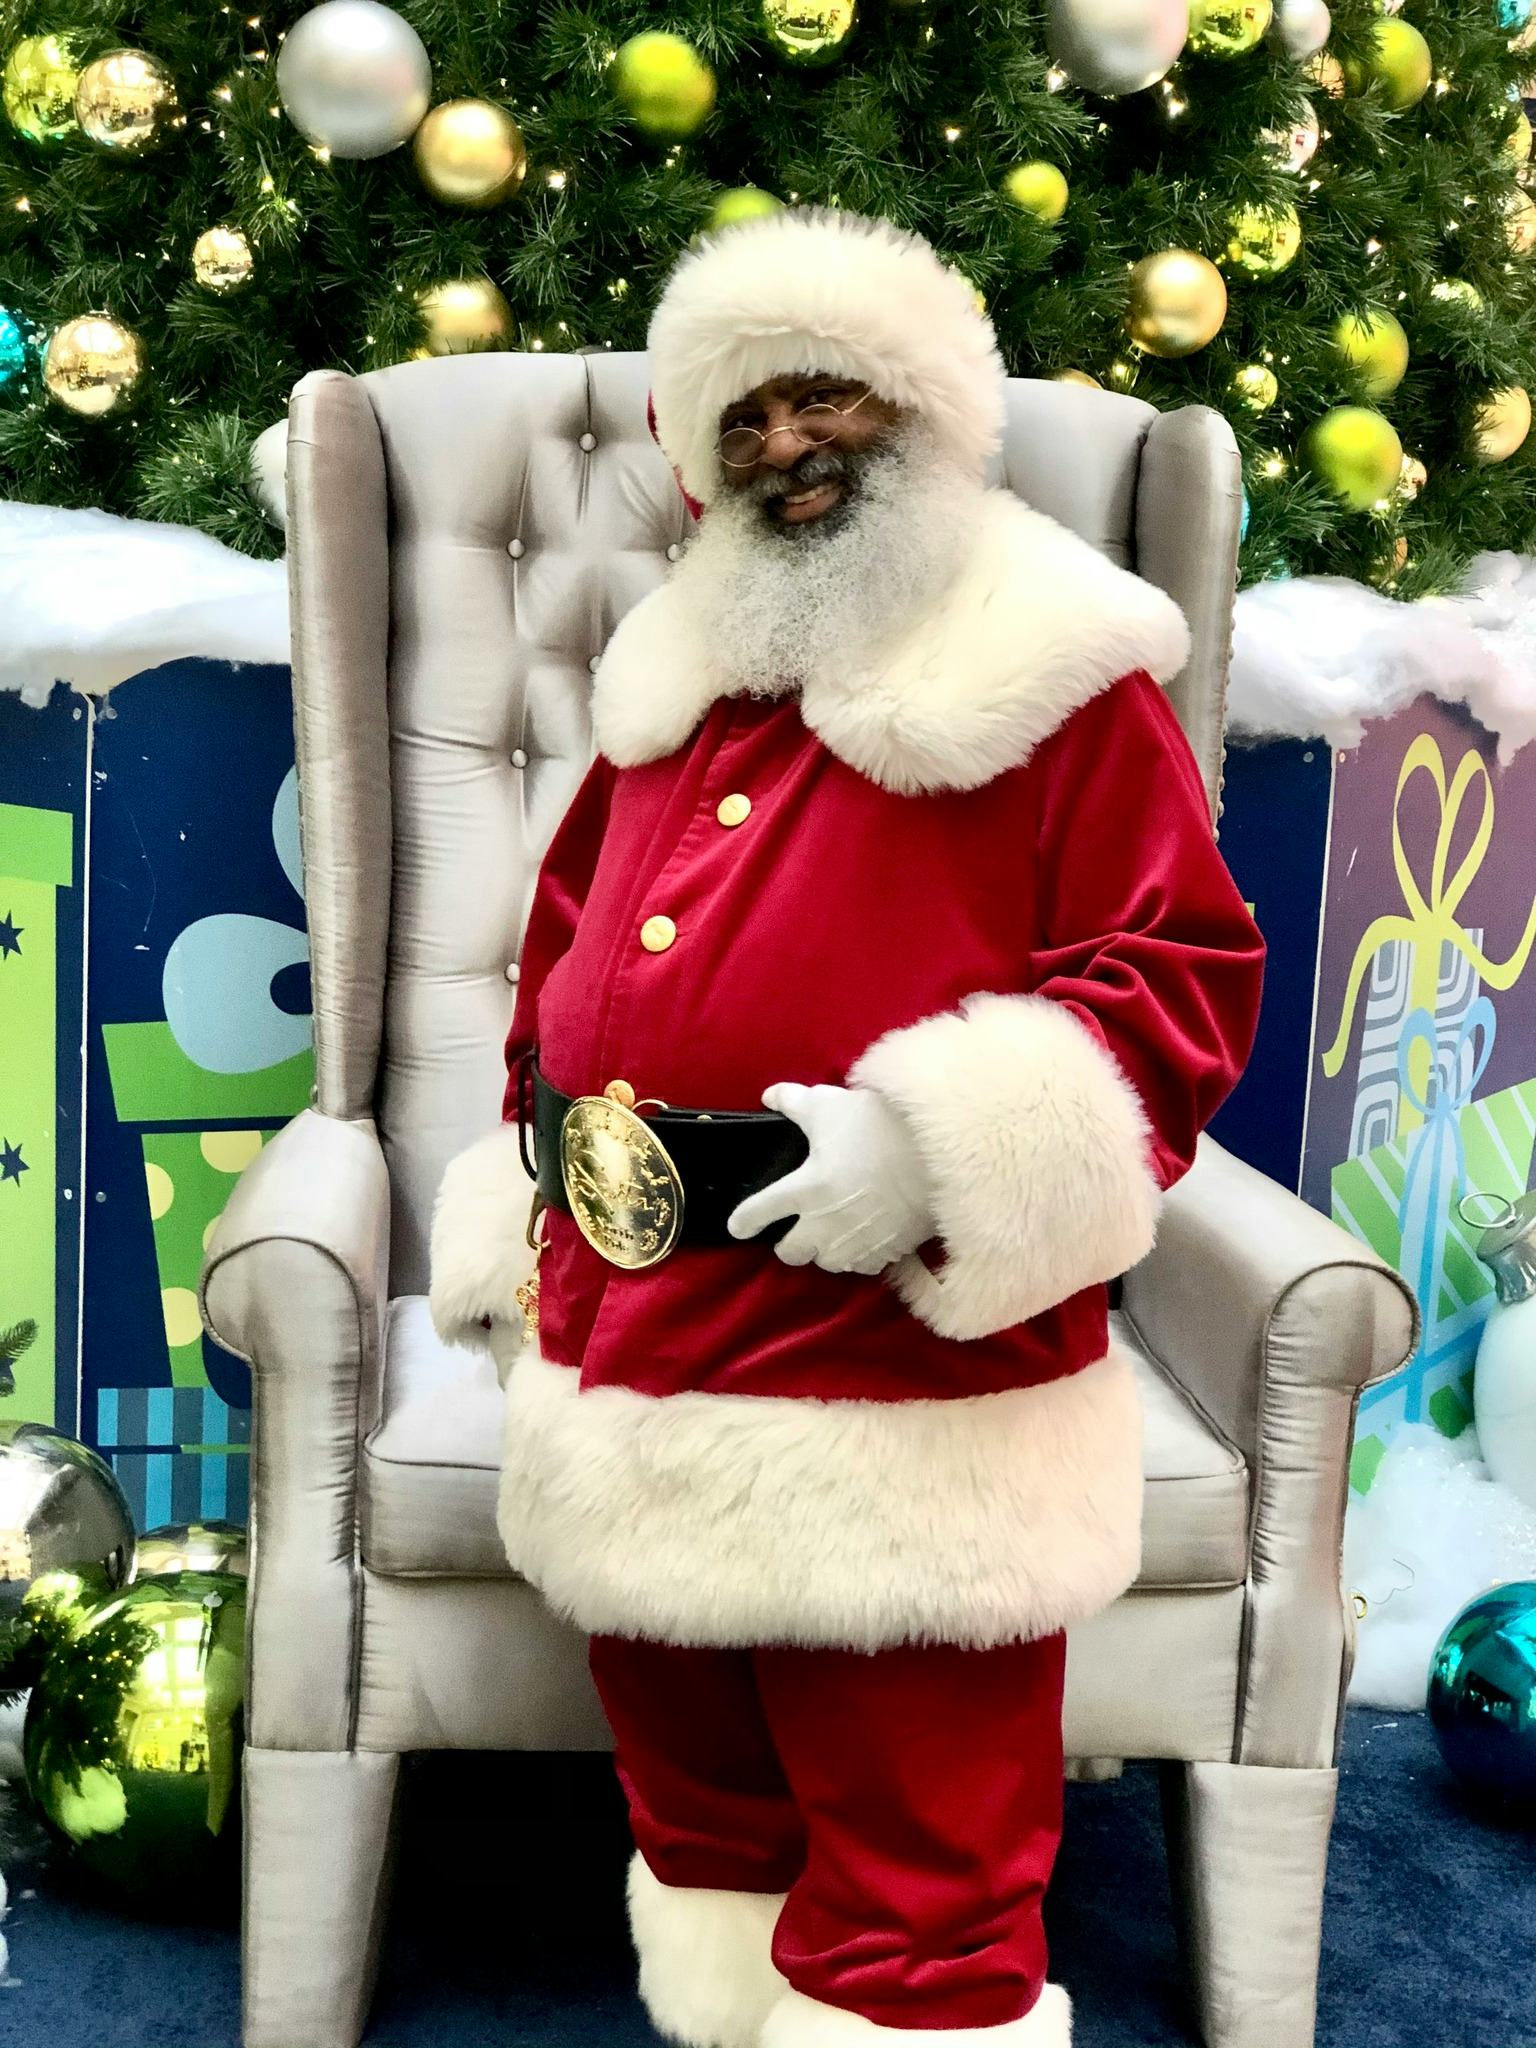 Merry Memories with Santa: Pose for Pictures at Baldwin Hills Crenshaw